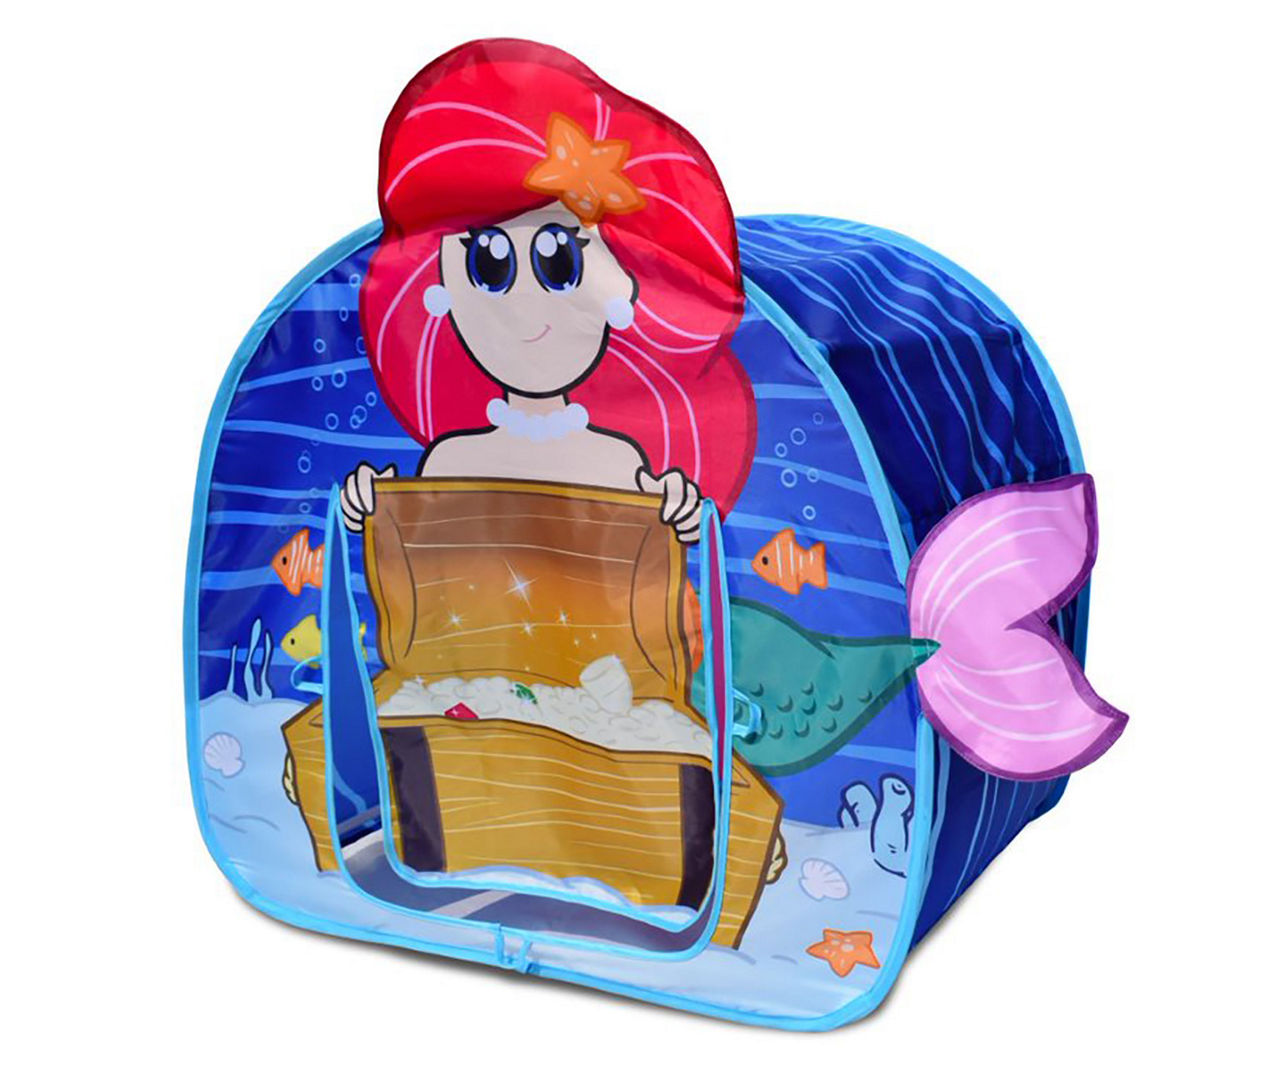 Mermaid Toys for Girls Outdoor & Indoor Tent for Kids Magical Kids Play Tent Mermaid Gifts for Girls Kids Tent Play Tents for Girls W&O Musical Mermaid Tent with Under-The-Sea Button 